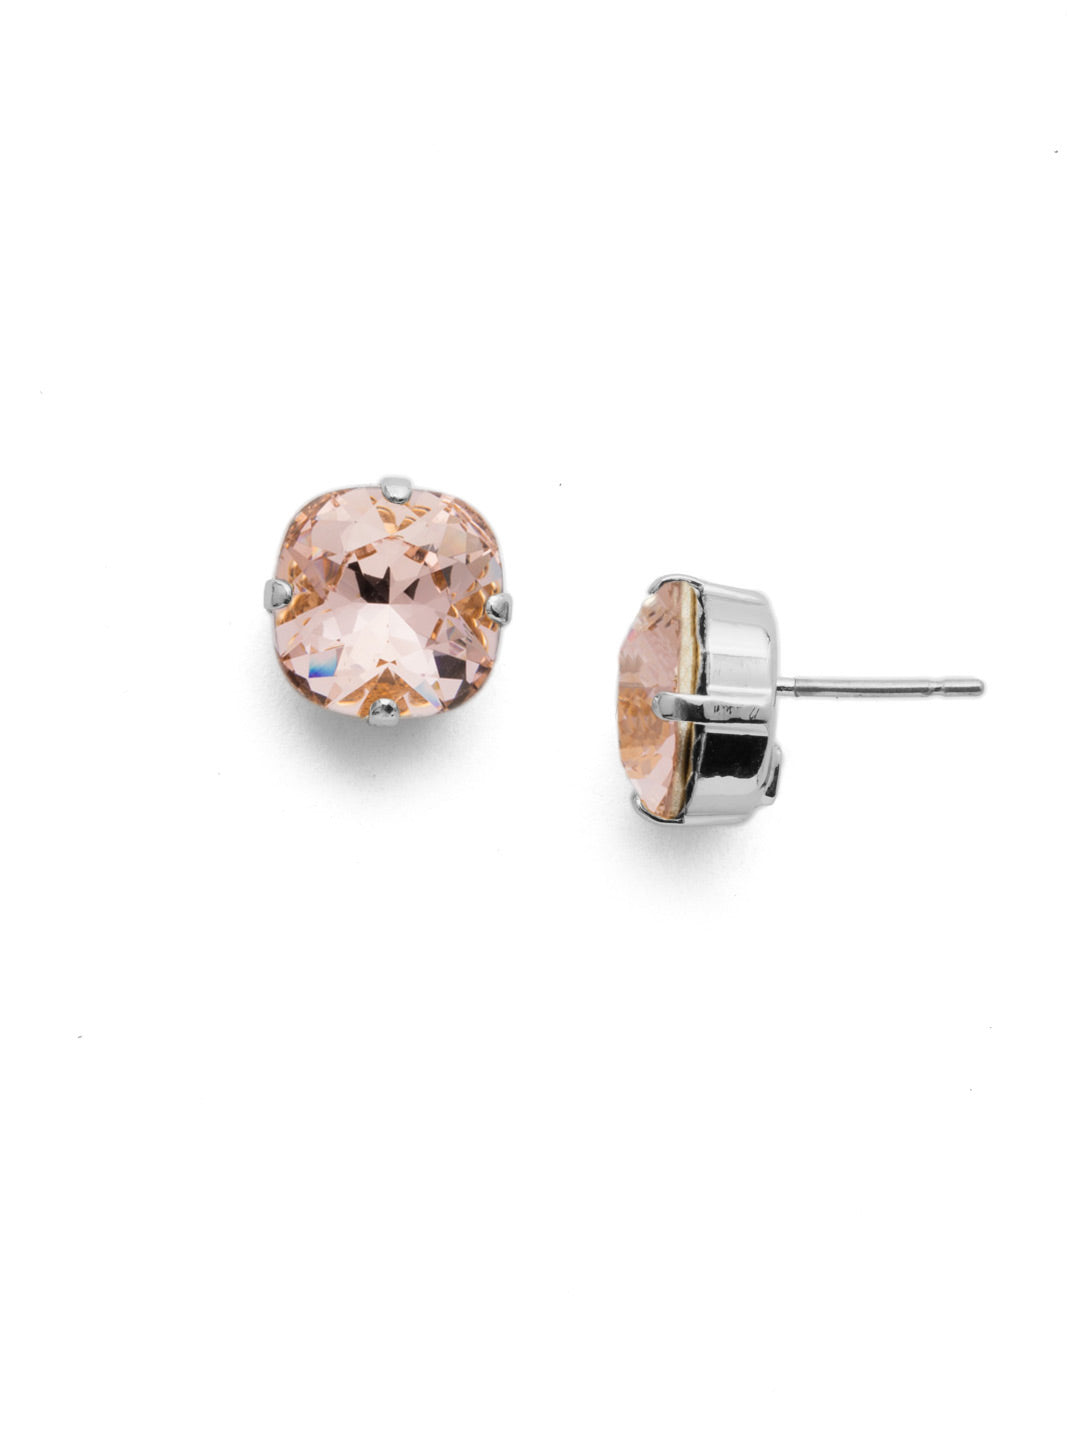 Halcyon Stud Earrings - EDH25PDVIN - <p>A beautiful, luminous cushion-cut crystal in a classic four-pronged setting that's ideal for everyday wear. From Sorrelli's Vintage Rose collection in our Palladium finish.</p>